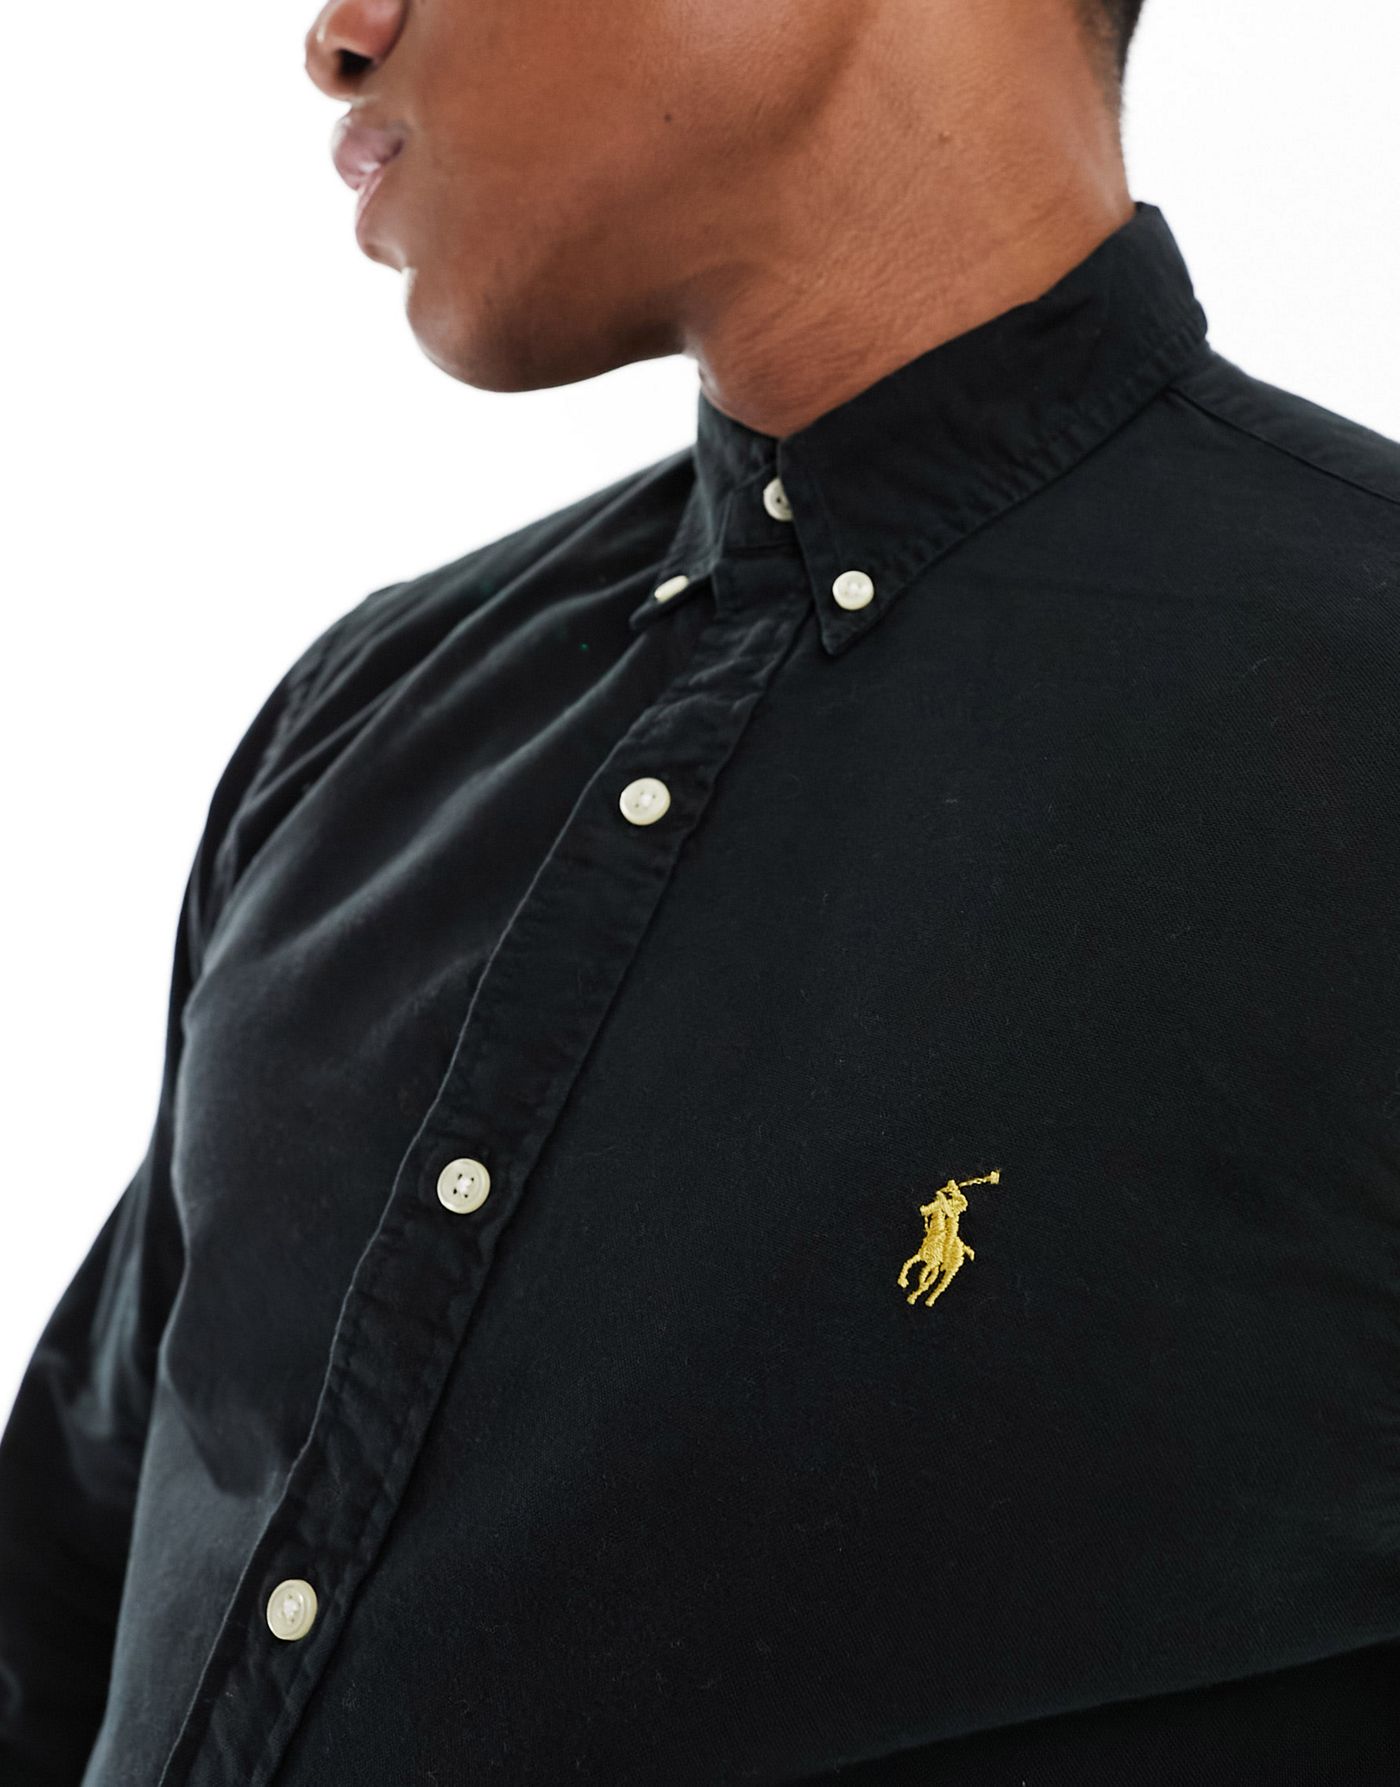 Polo Ralph Lauren gold icon logo slim fit garment dyed oxford shirt in black